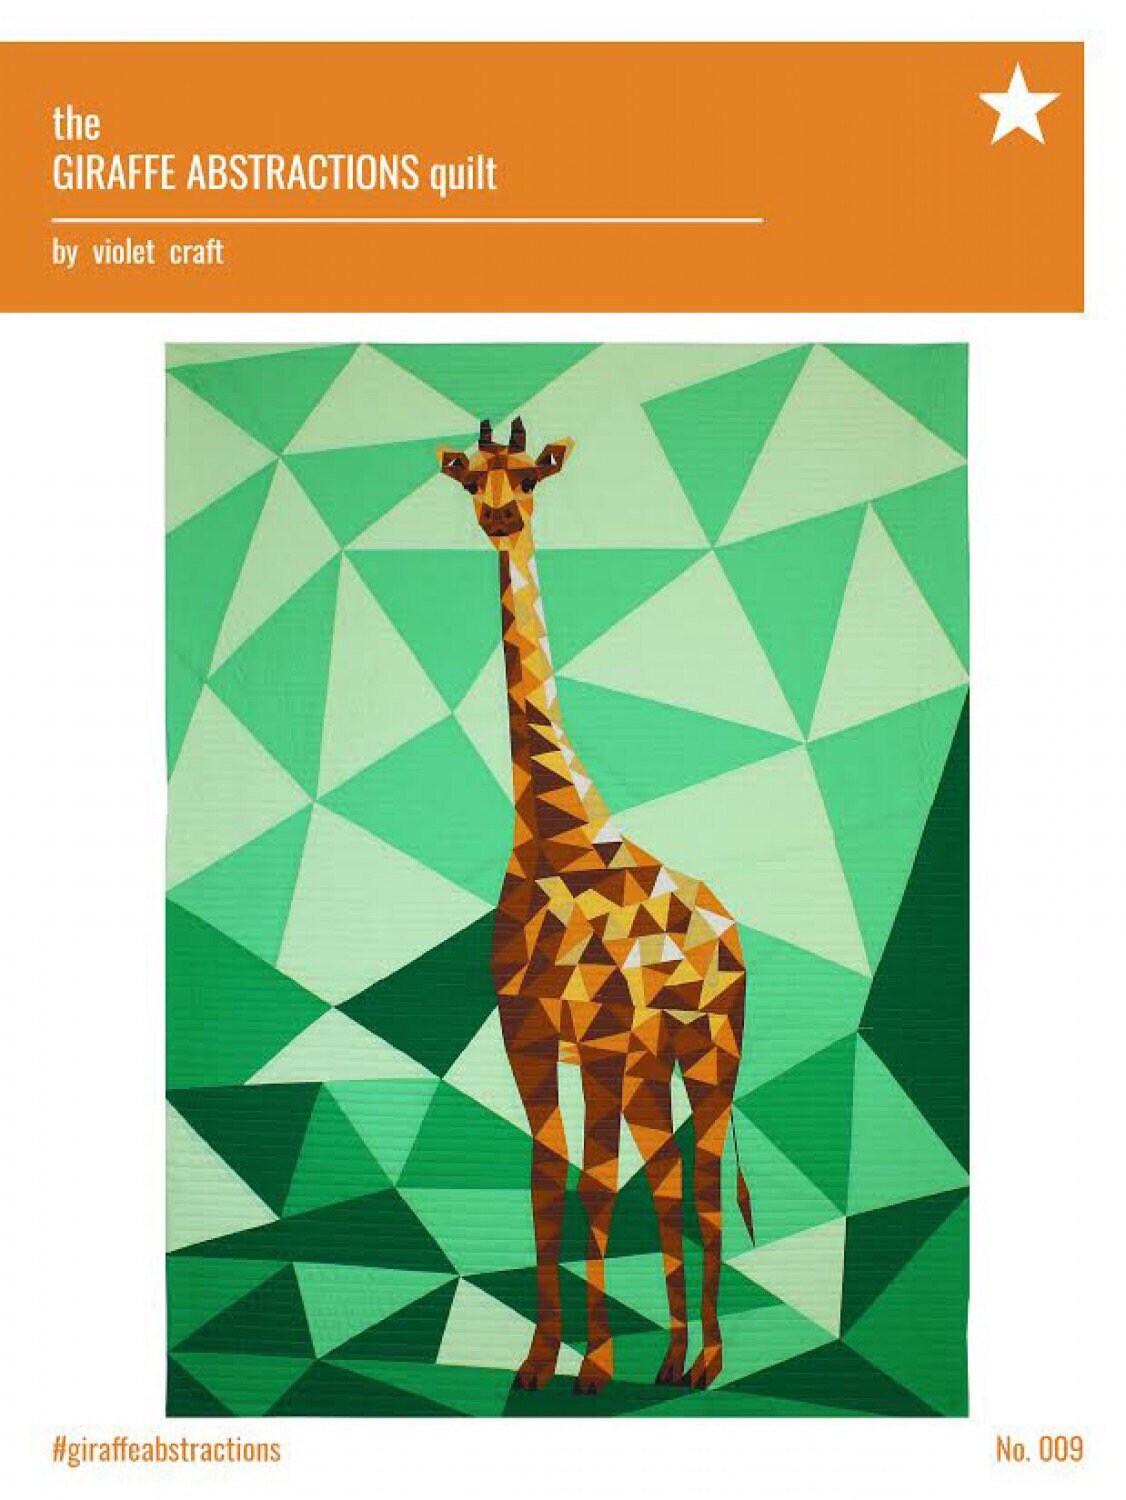 Giraffe Abstractions Quilt  - Violet Craft - Foundation Paper Piecing Pattern